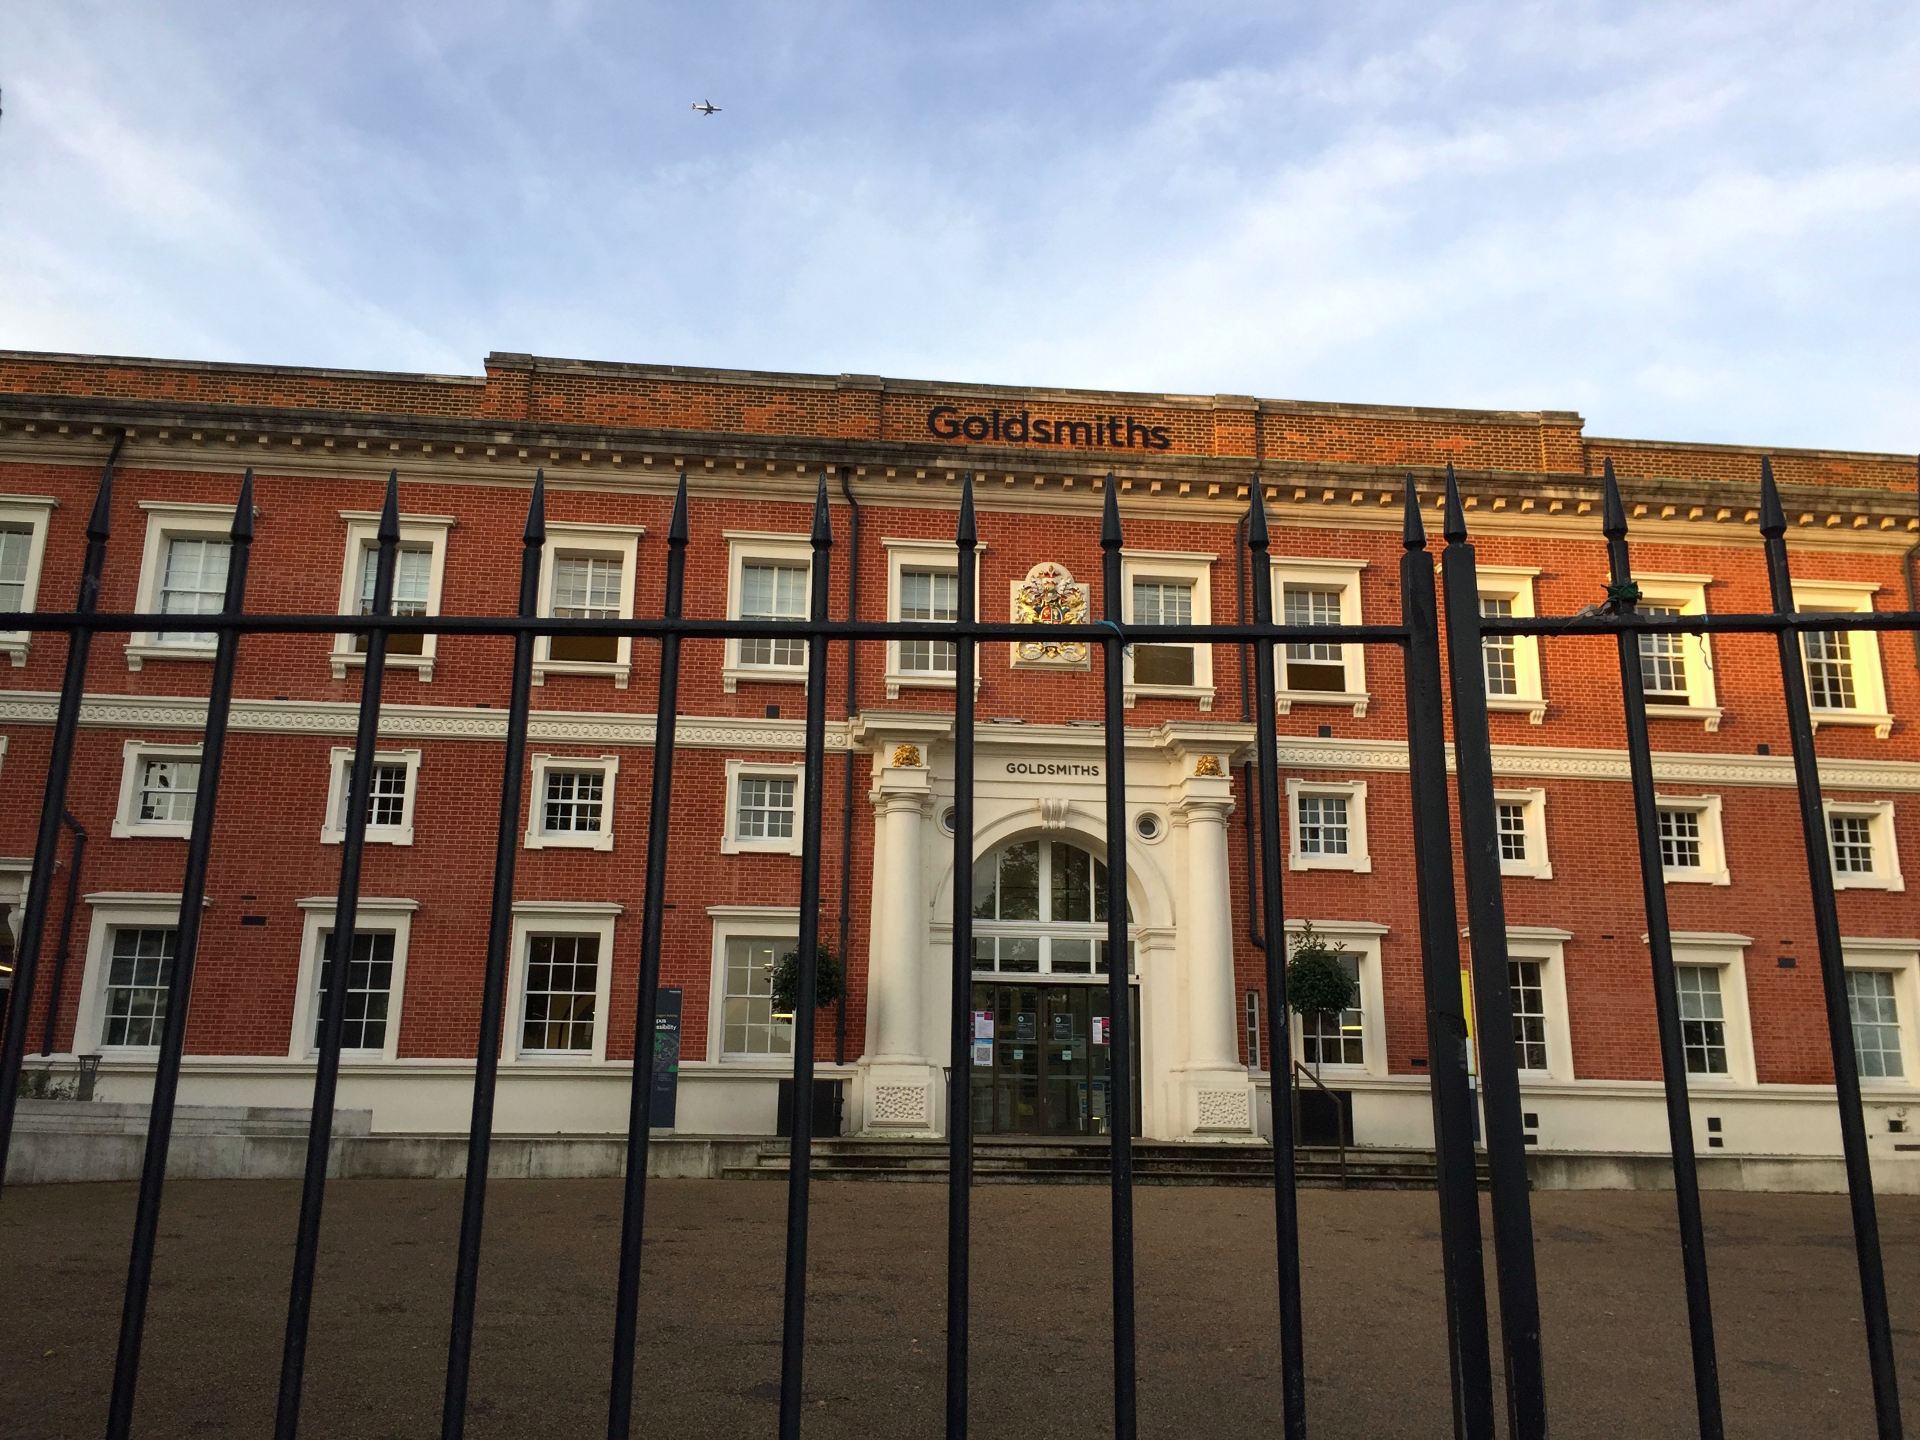 Picture of the front of Goldsmiths, University of London with the gates closed.